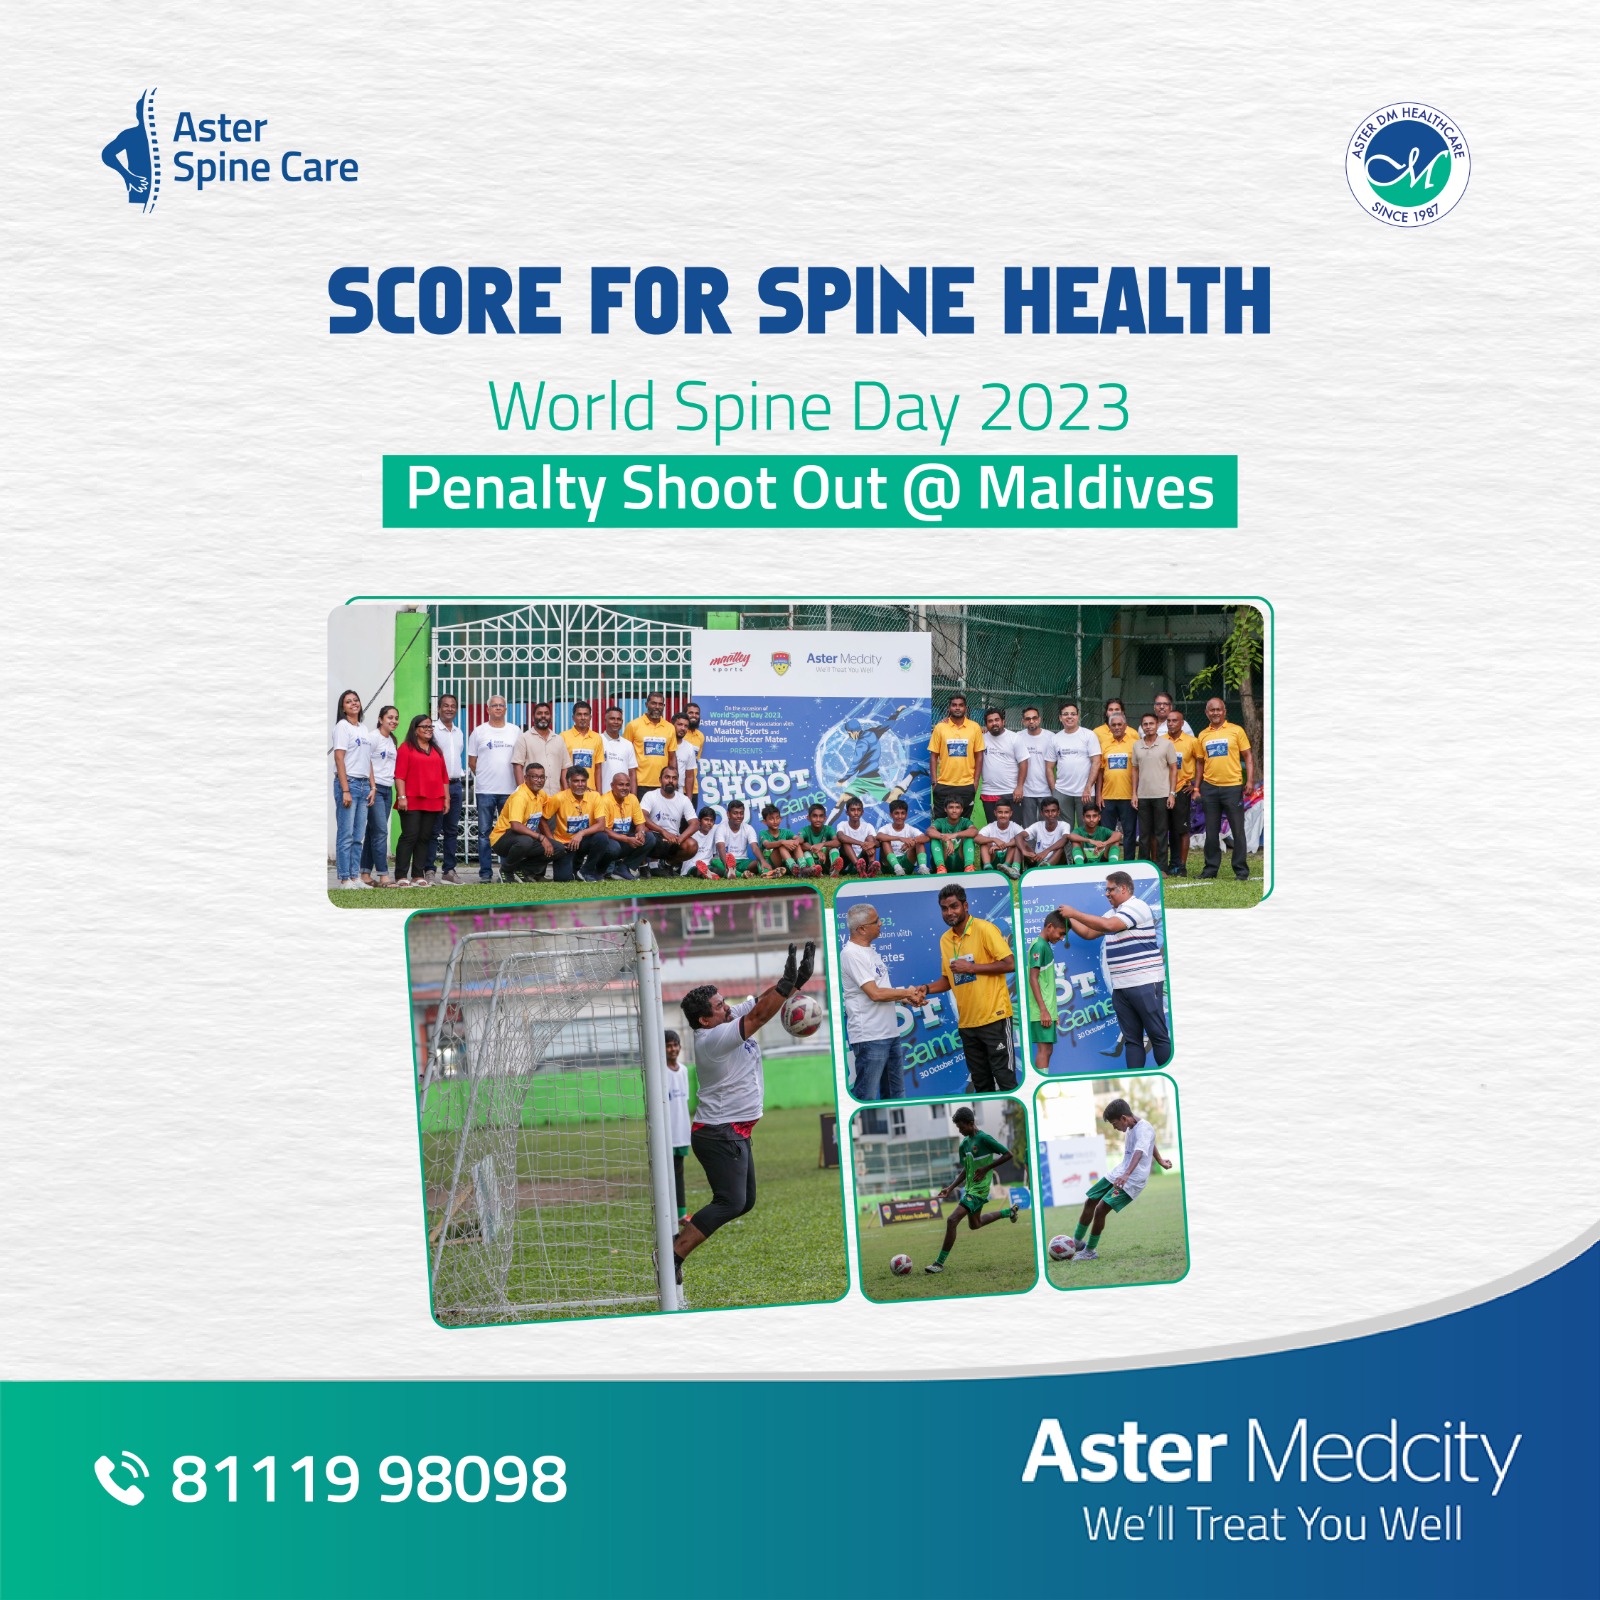 "Score for Spine Health: World Spine Day 2023 Penalty Shoot Out in Maldives"